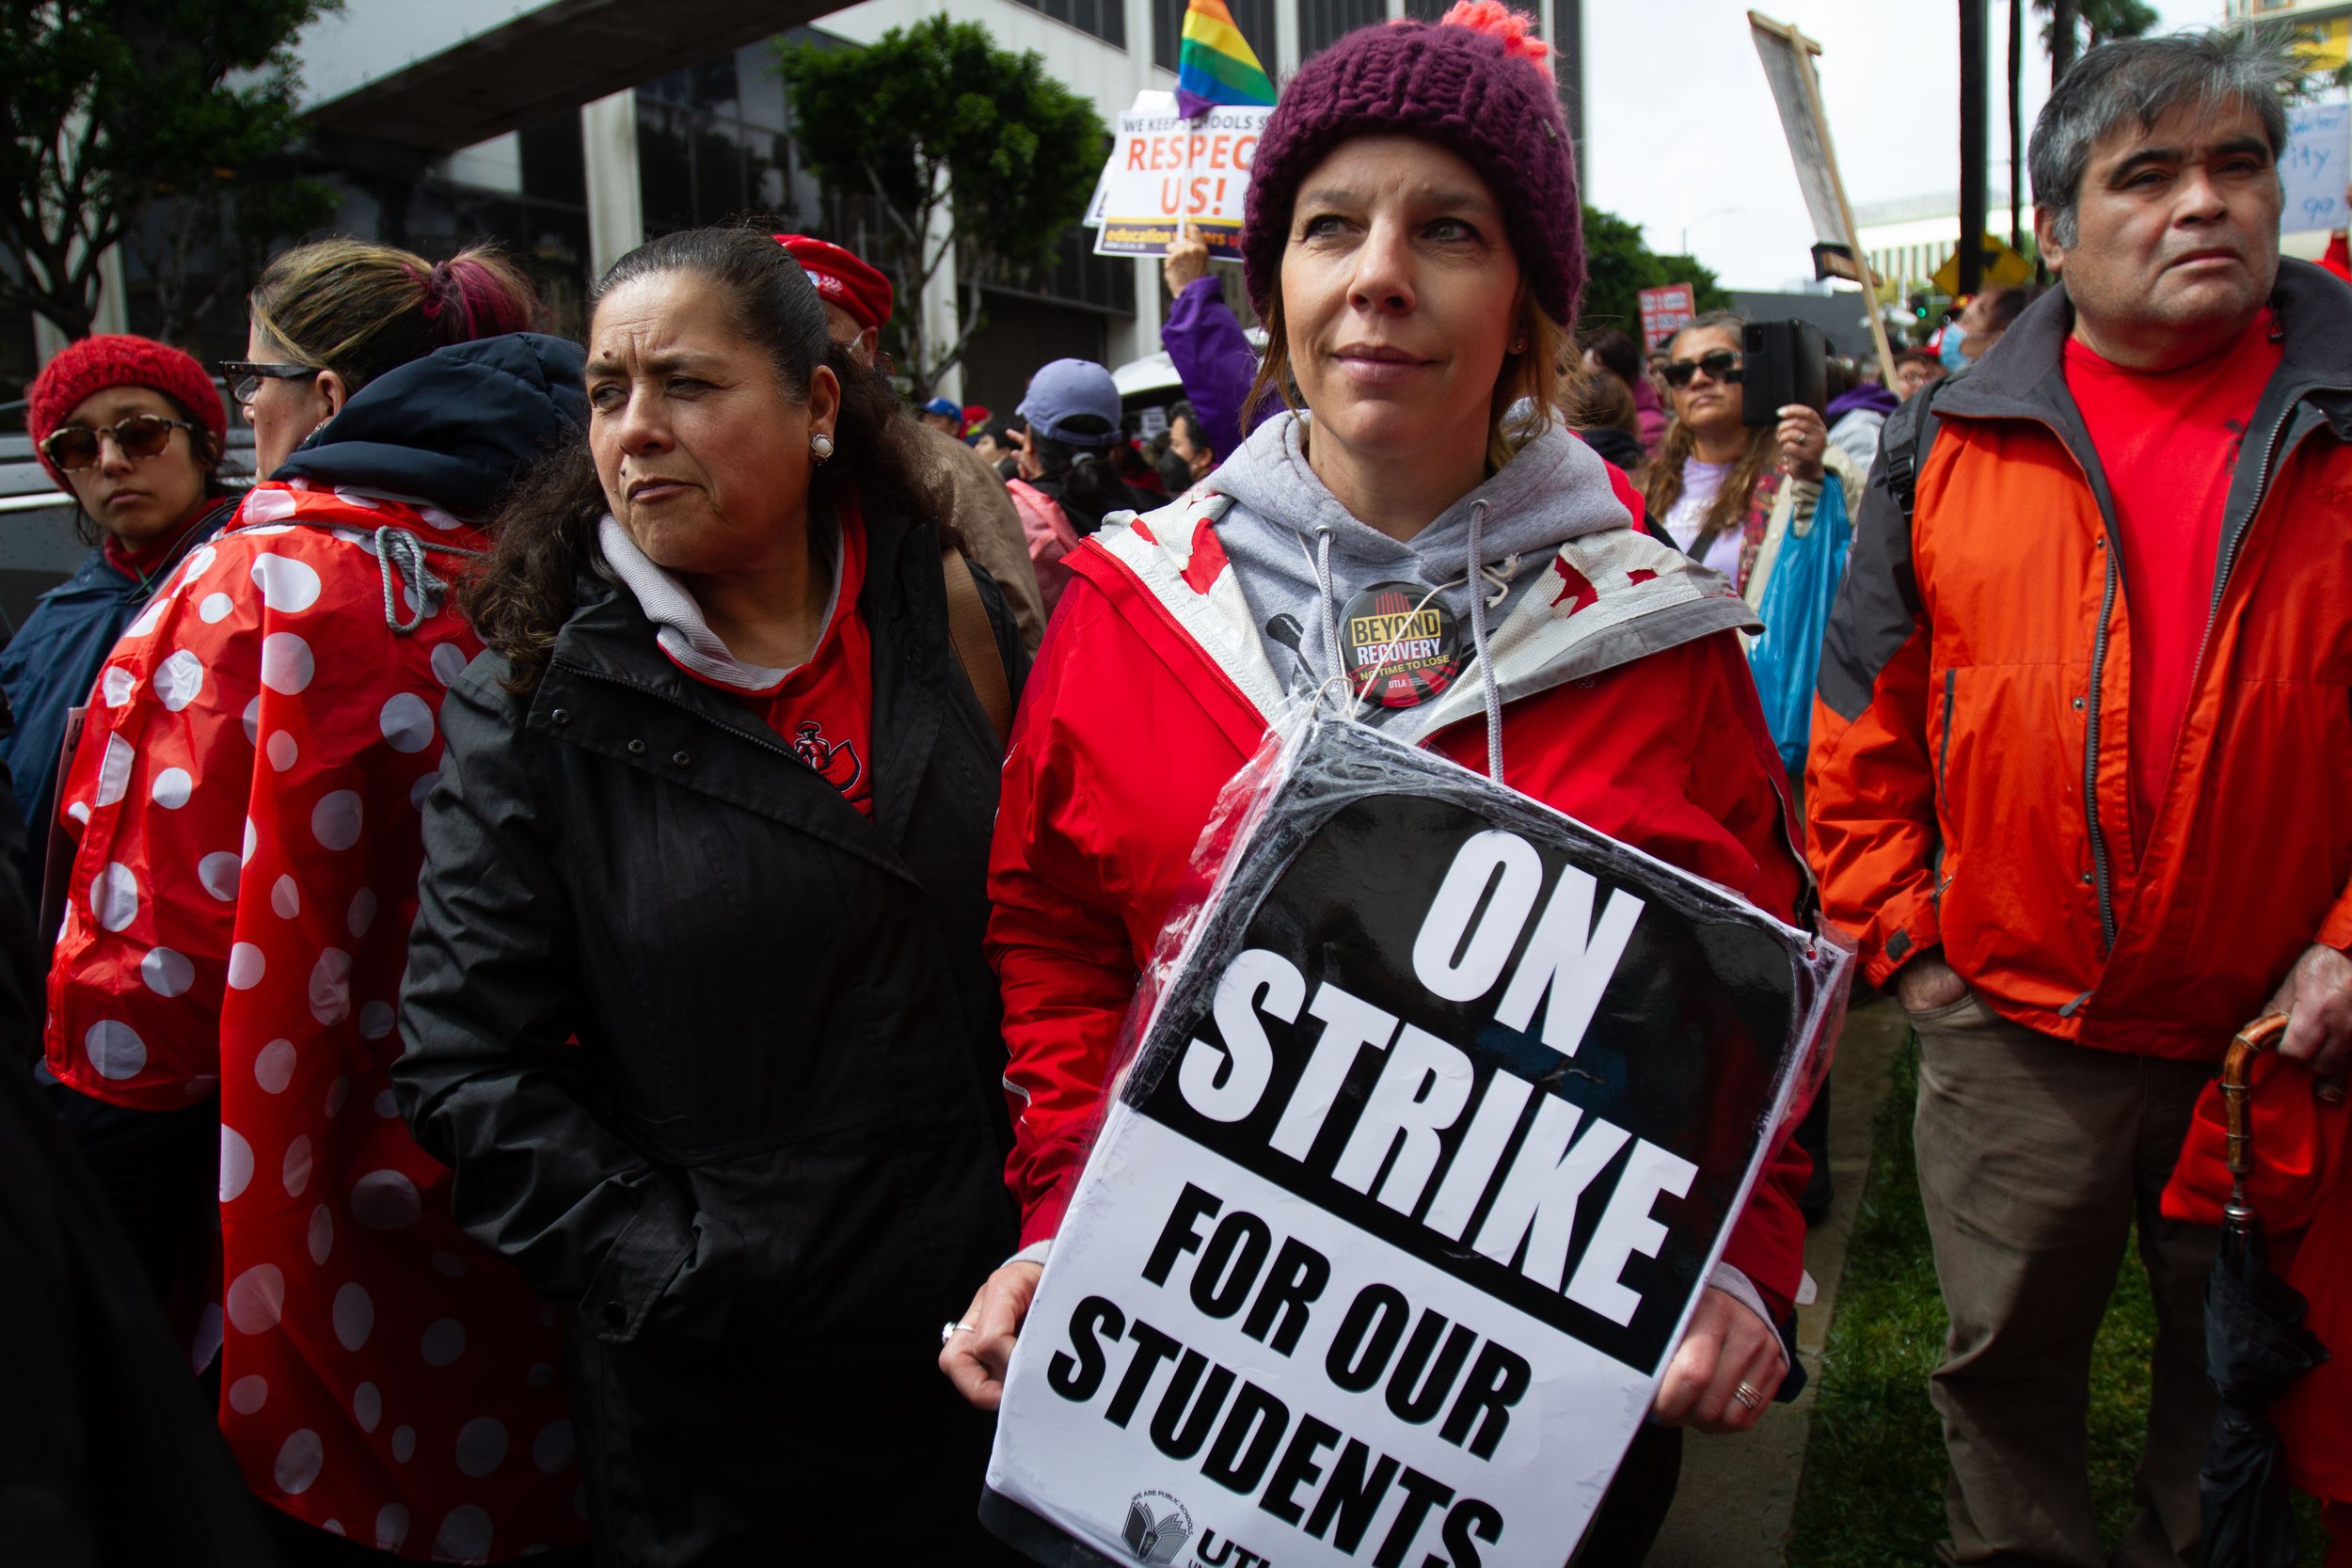  Patti Grimes, a special education teacher from Los Angeles Unified School District, protests on Tuesday, March 21, 2023 at the LAUSD headquarters in Downtown L.A. The strike is being lead by SEIU Local 99 members protesting unfair labor practices. (